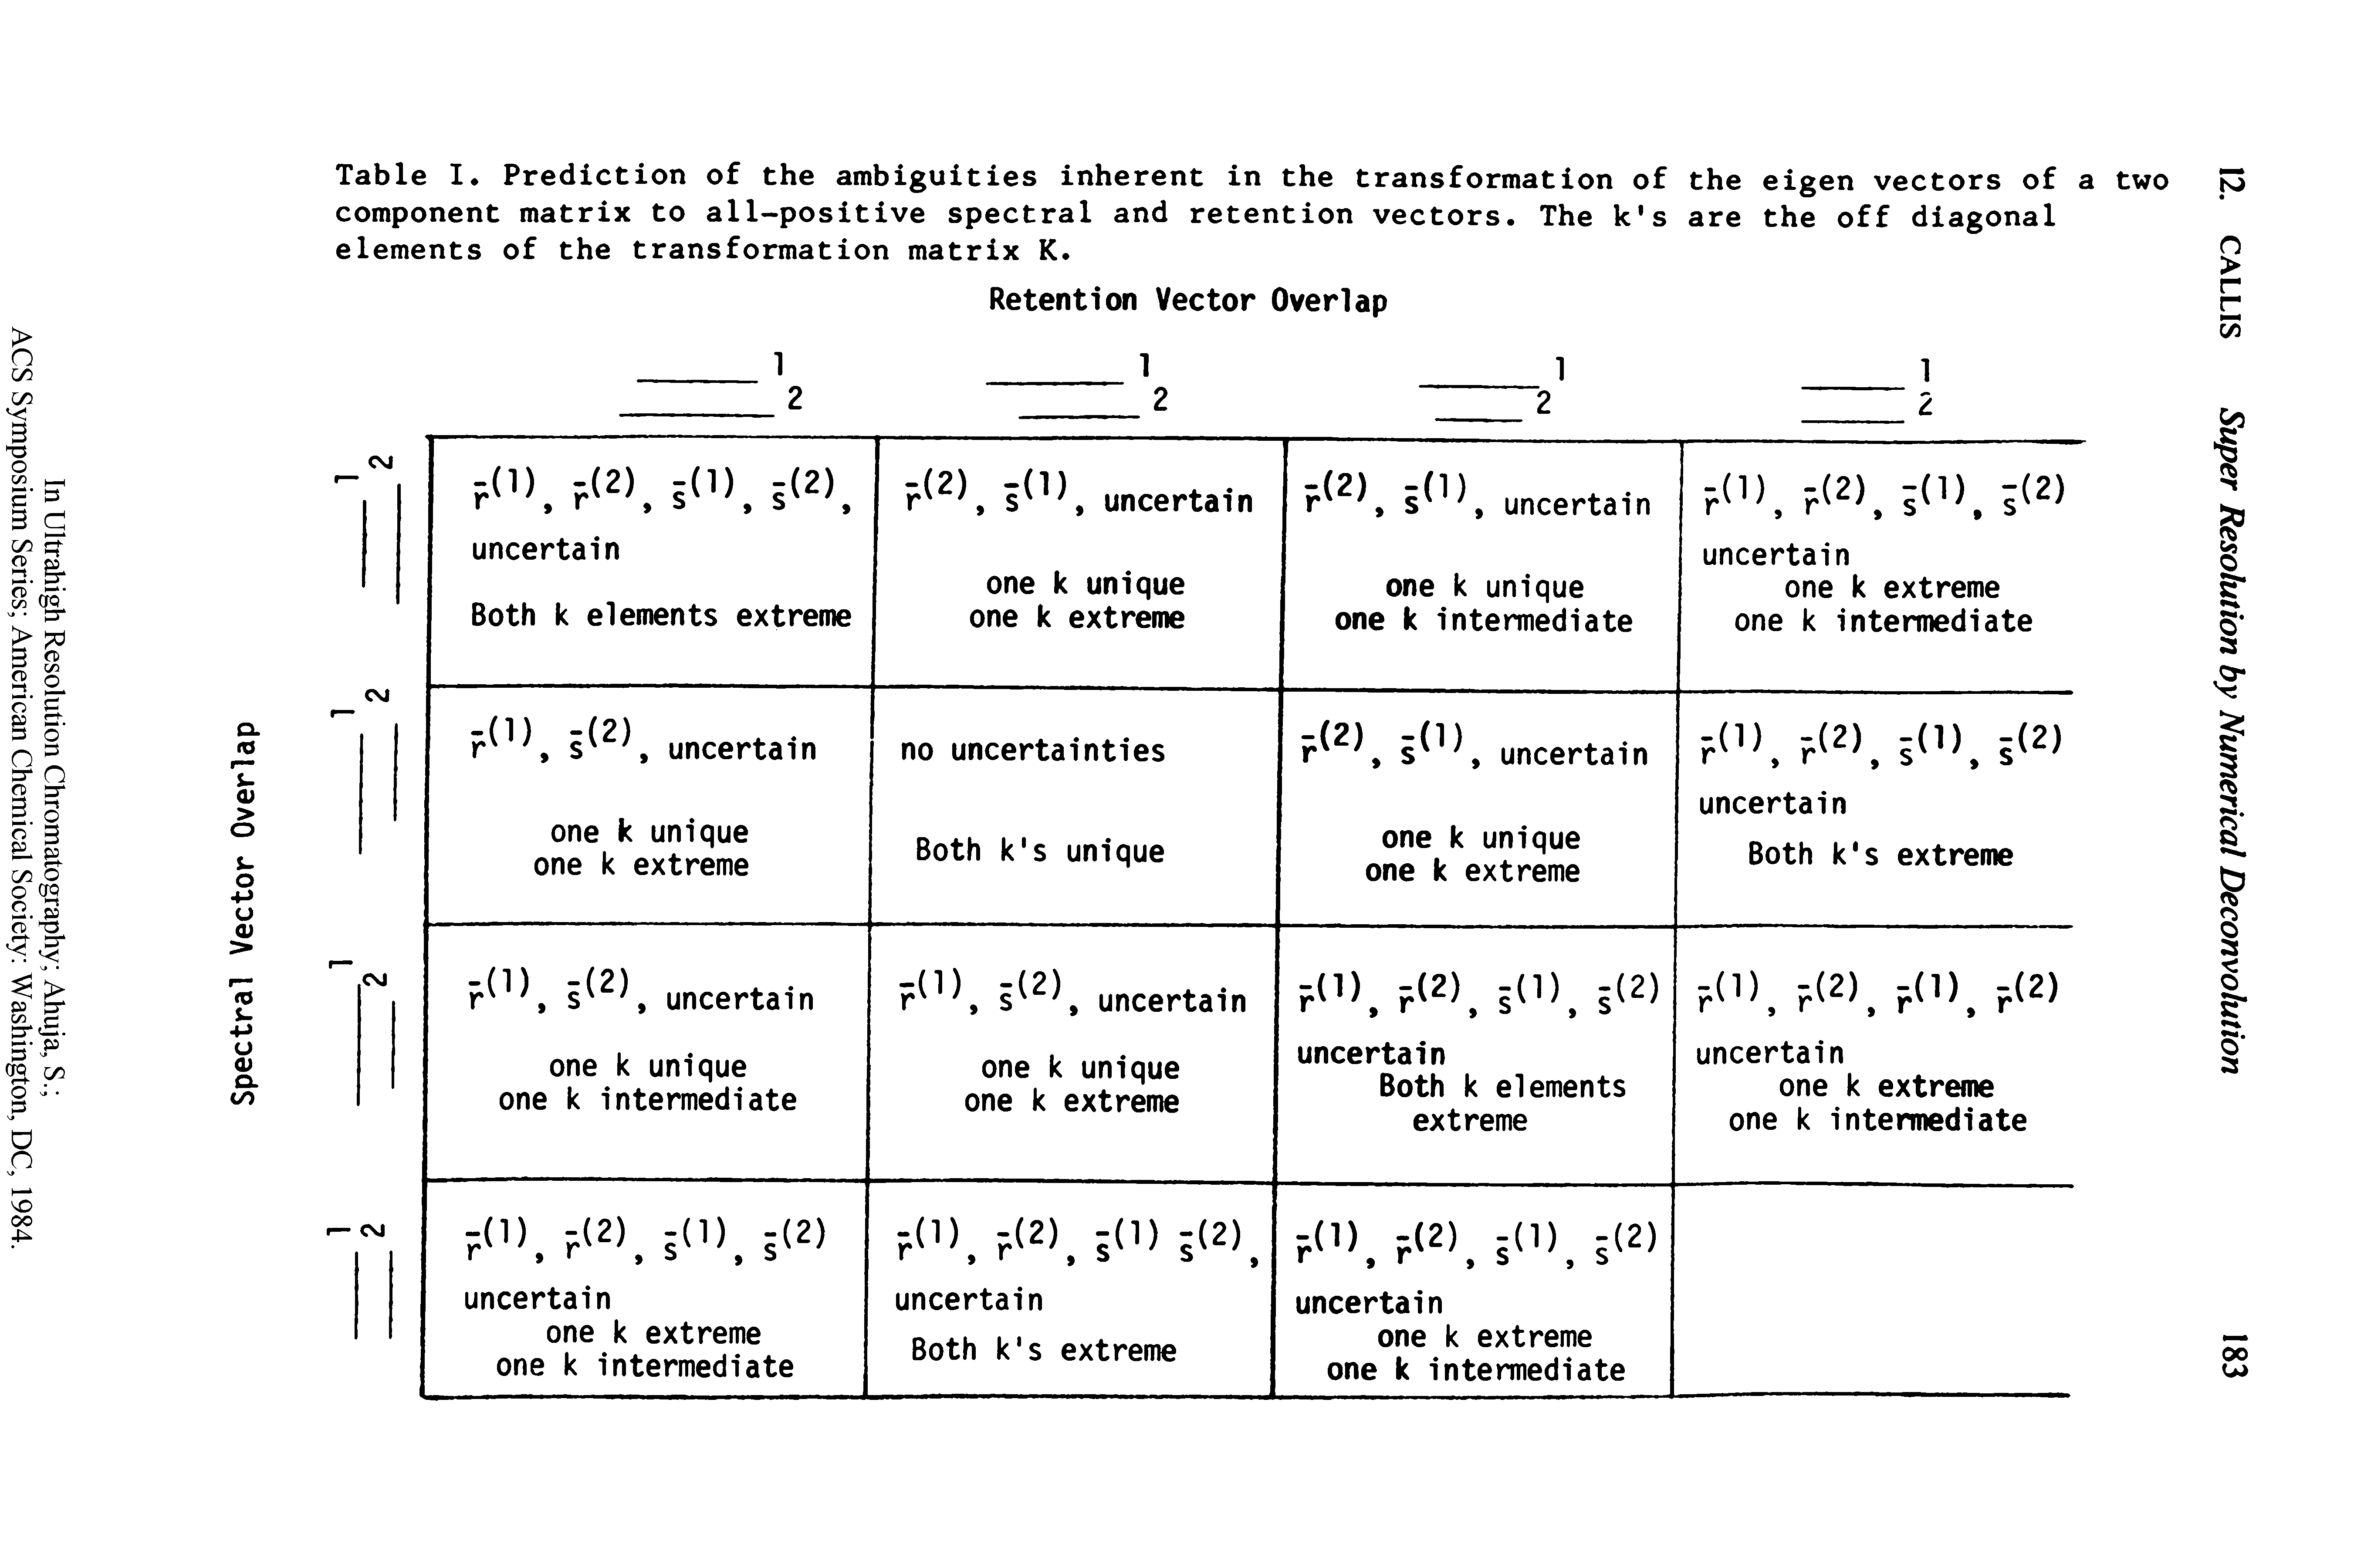 Table I. Prediction of the ambiguities inherent in the transformation of the eigen vectors of a two component matrix to all-positive spectral and retention vectors. The k s are the off diagonal elements of the transformation matrix K.